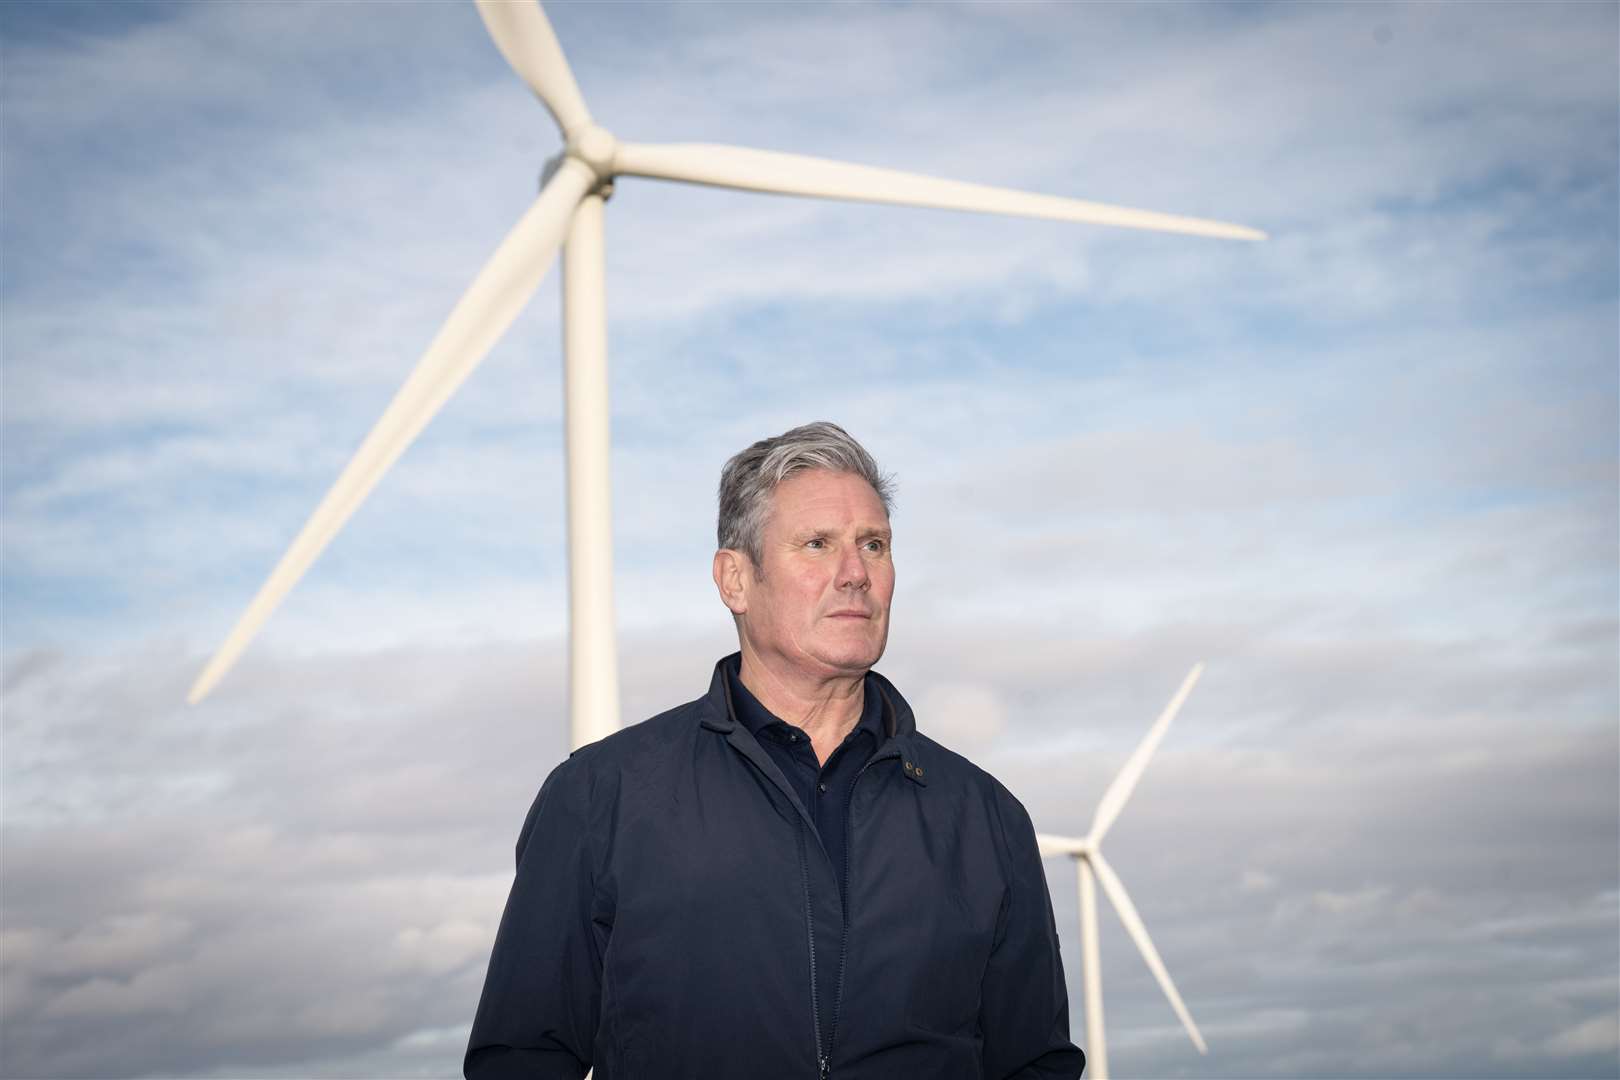 Sir Keir Starmer has made Labour’s ‘Green Prosperity Plan’ a central part of his party’s pitch for the next election, when climate change could be a key issue. (Stefan Rousseau/PA)